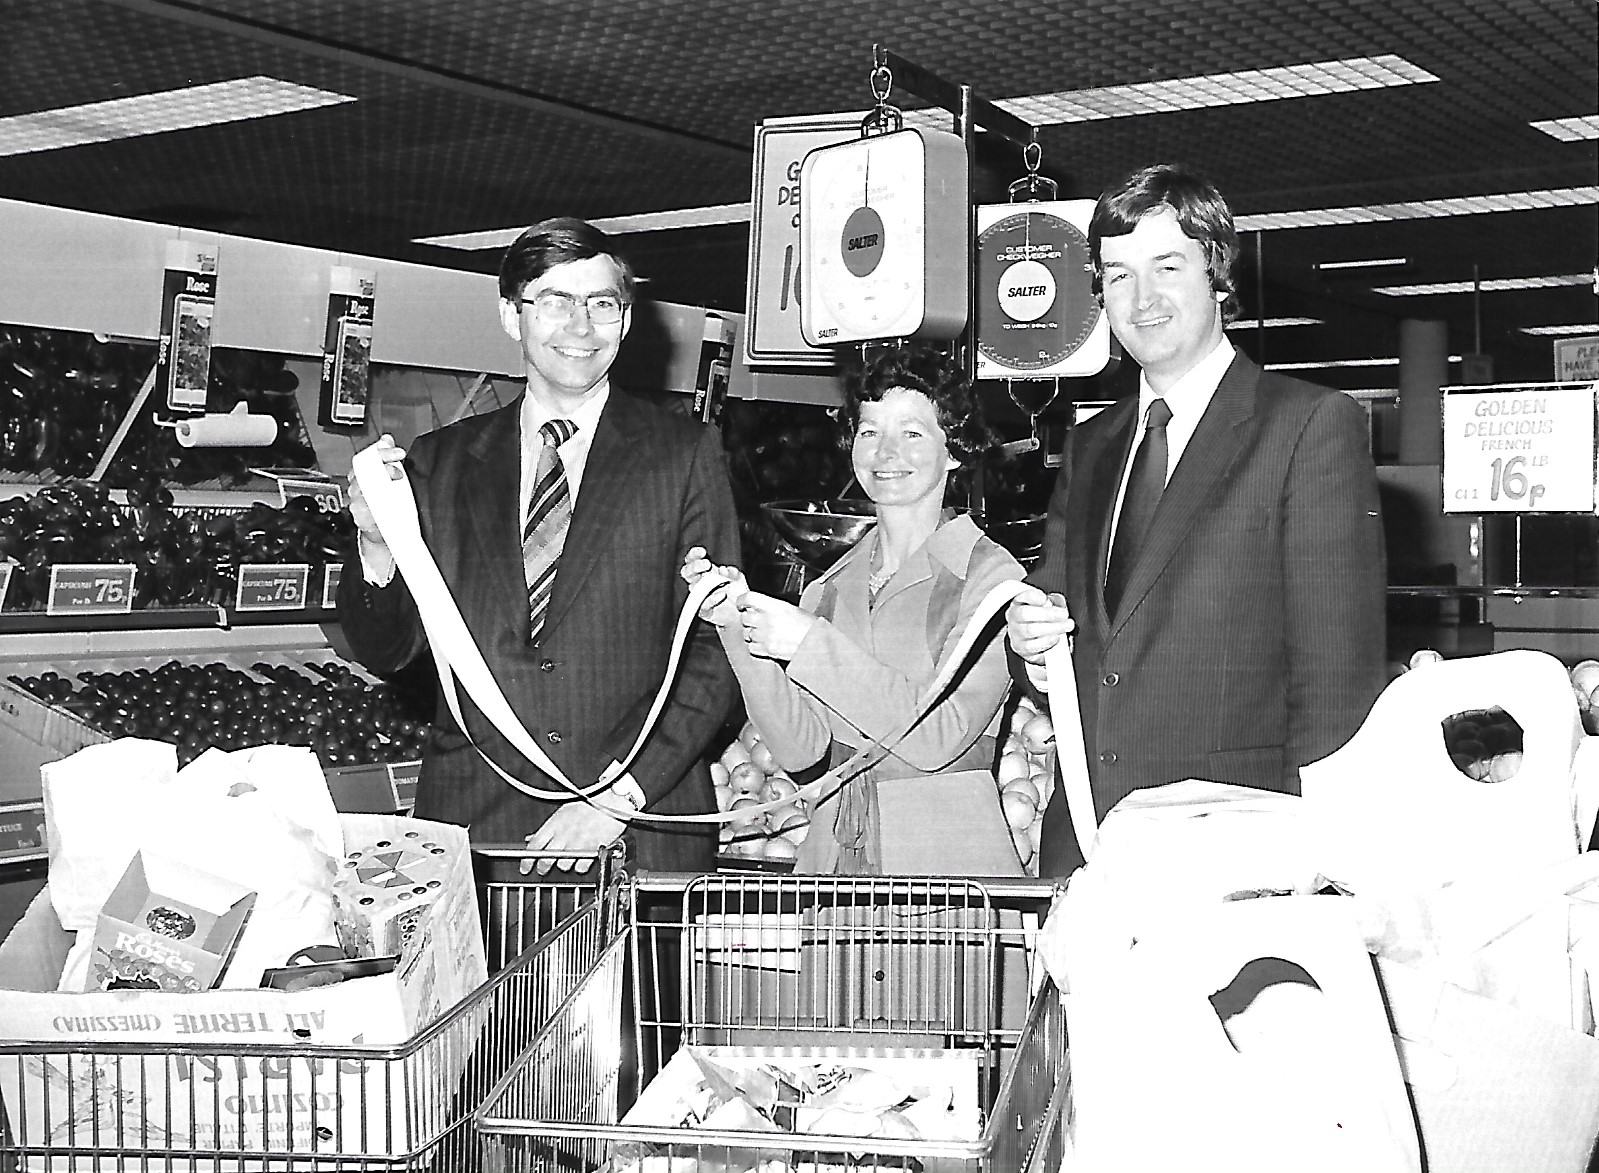 A  ‘Smash and Grab’ event taking place at the Mainstop supermarket on Tulketh Street in Southport in March 1981